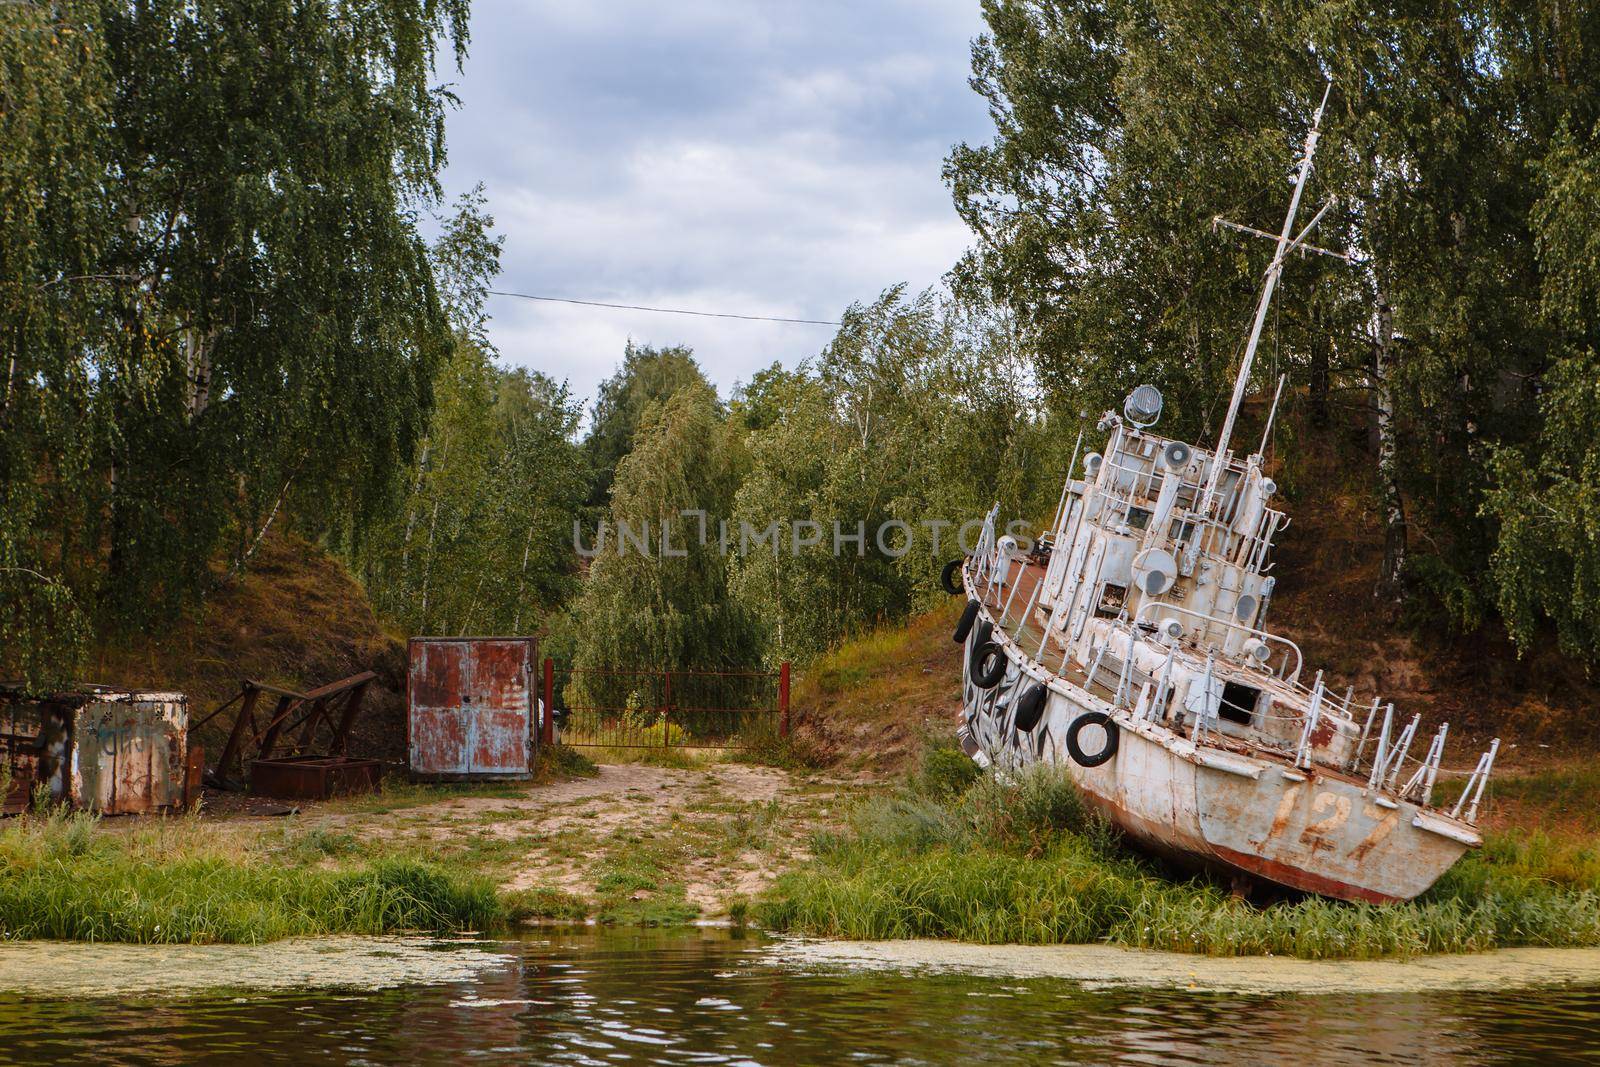 An old rusty military ship, stranded.